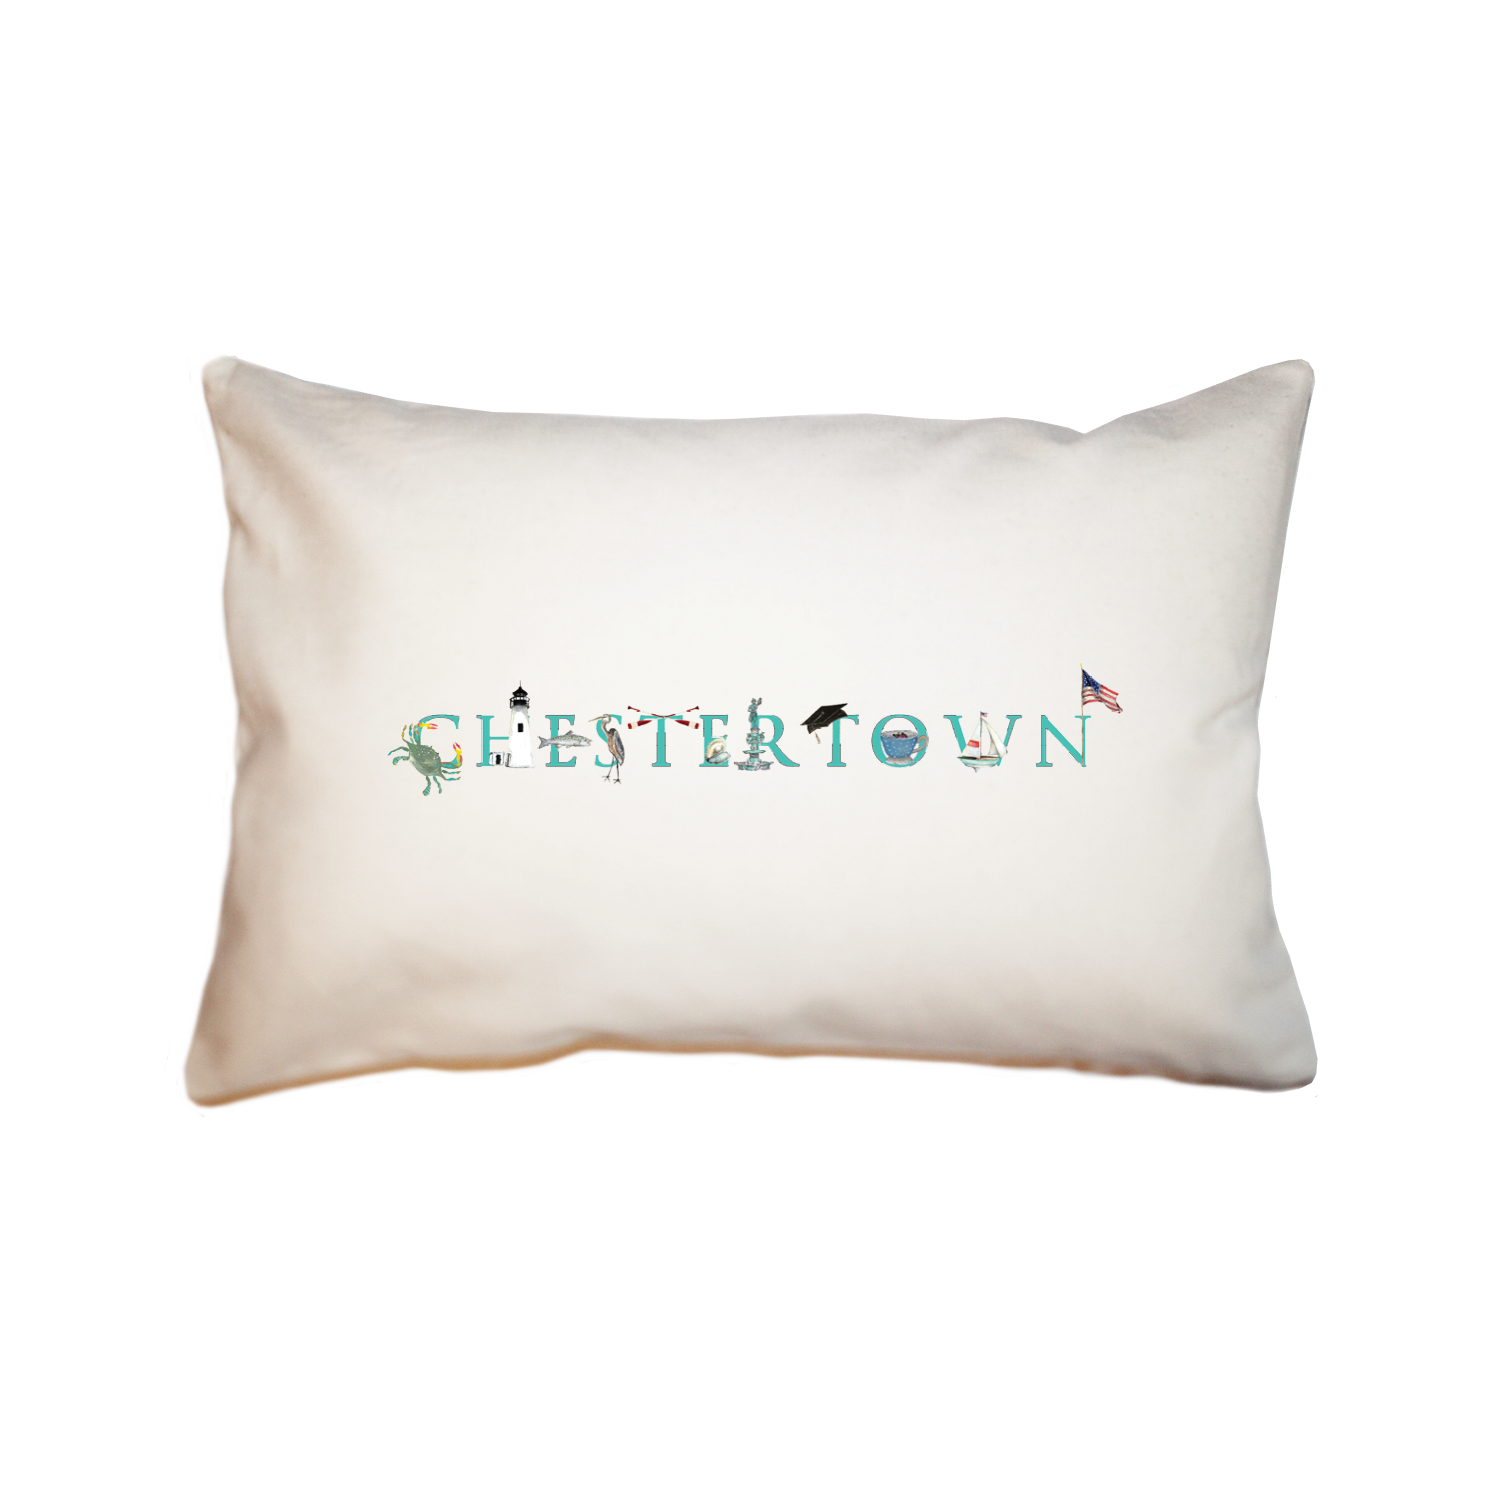 Chestertown large rectangle pillow